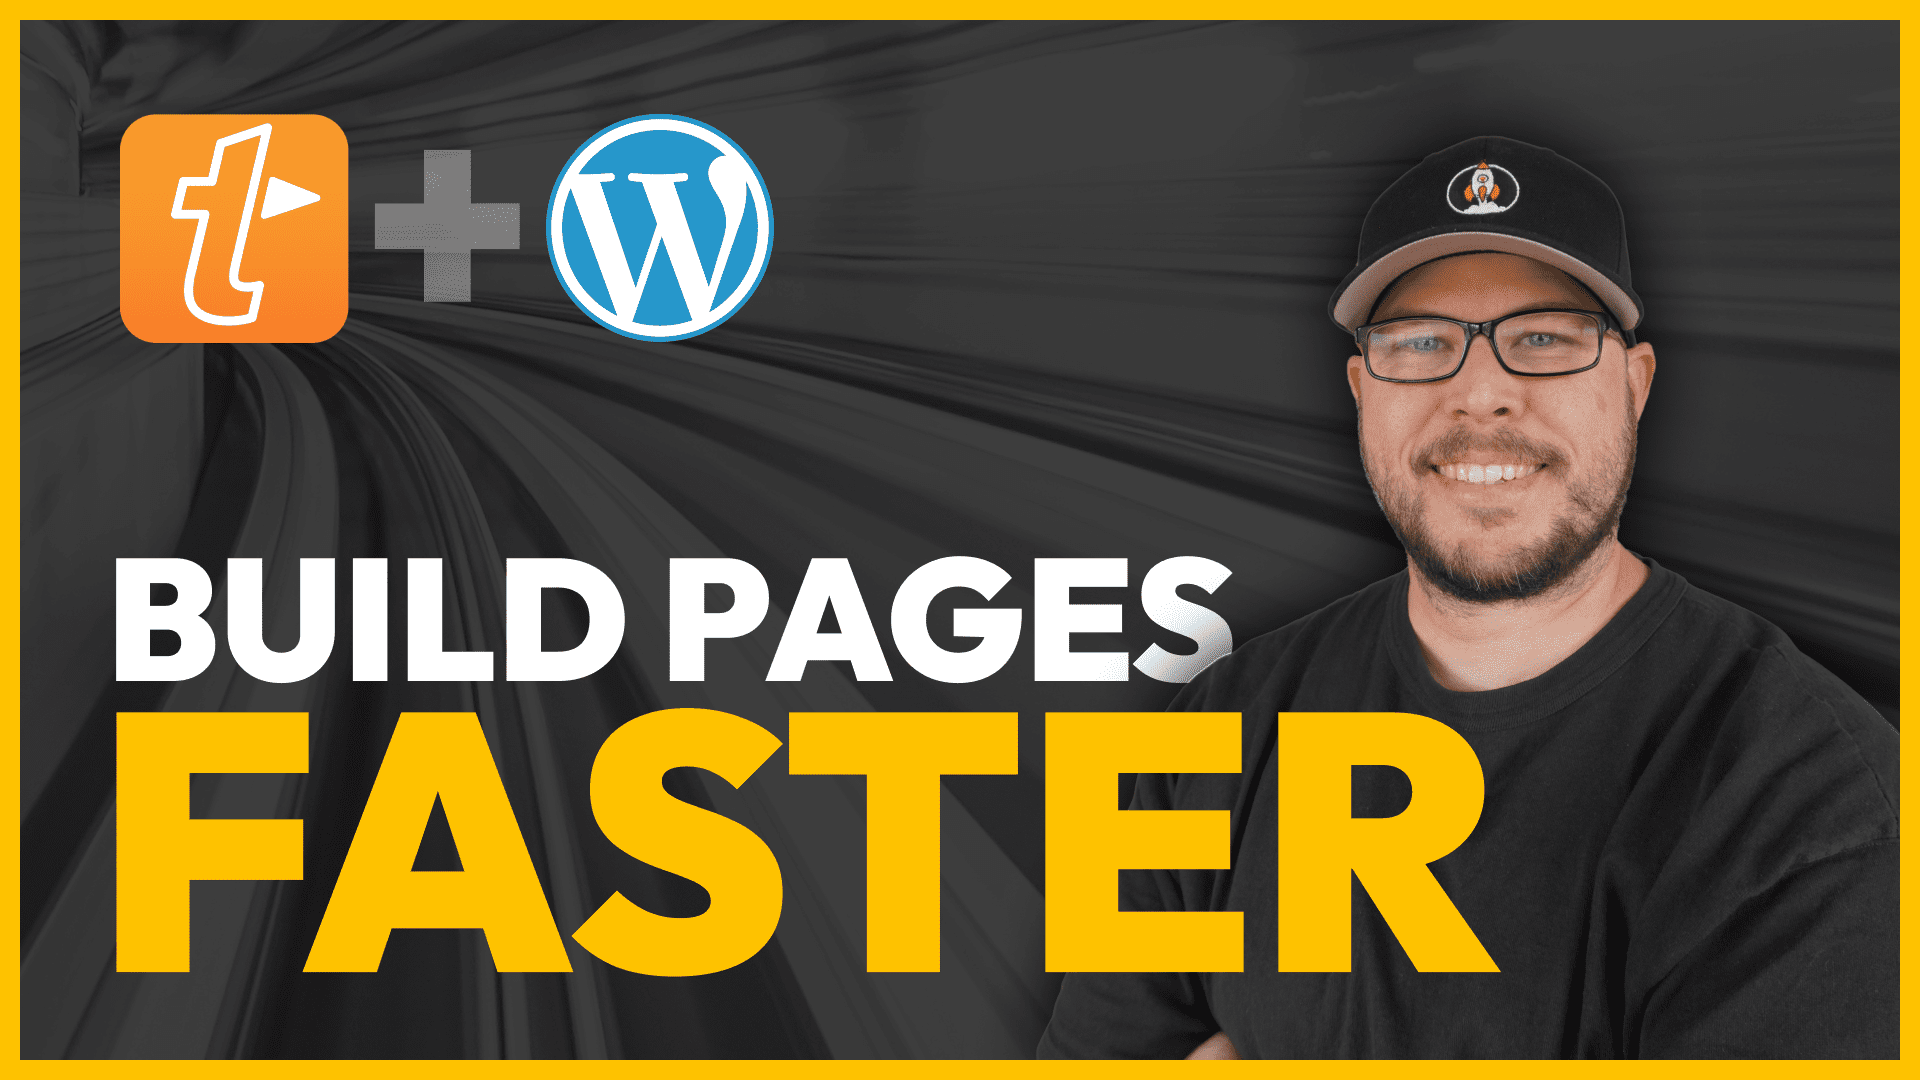 Build Pages Faster